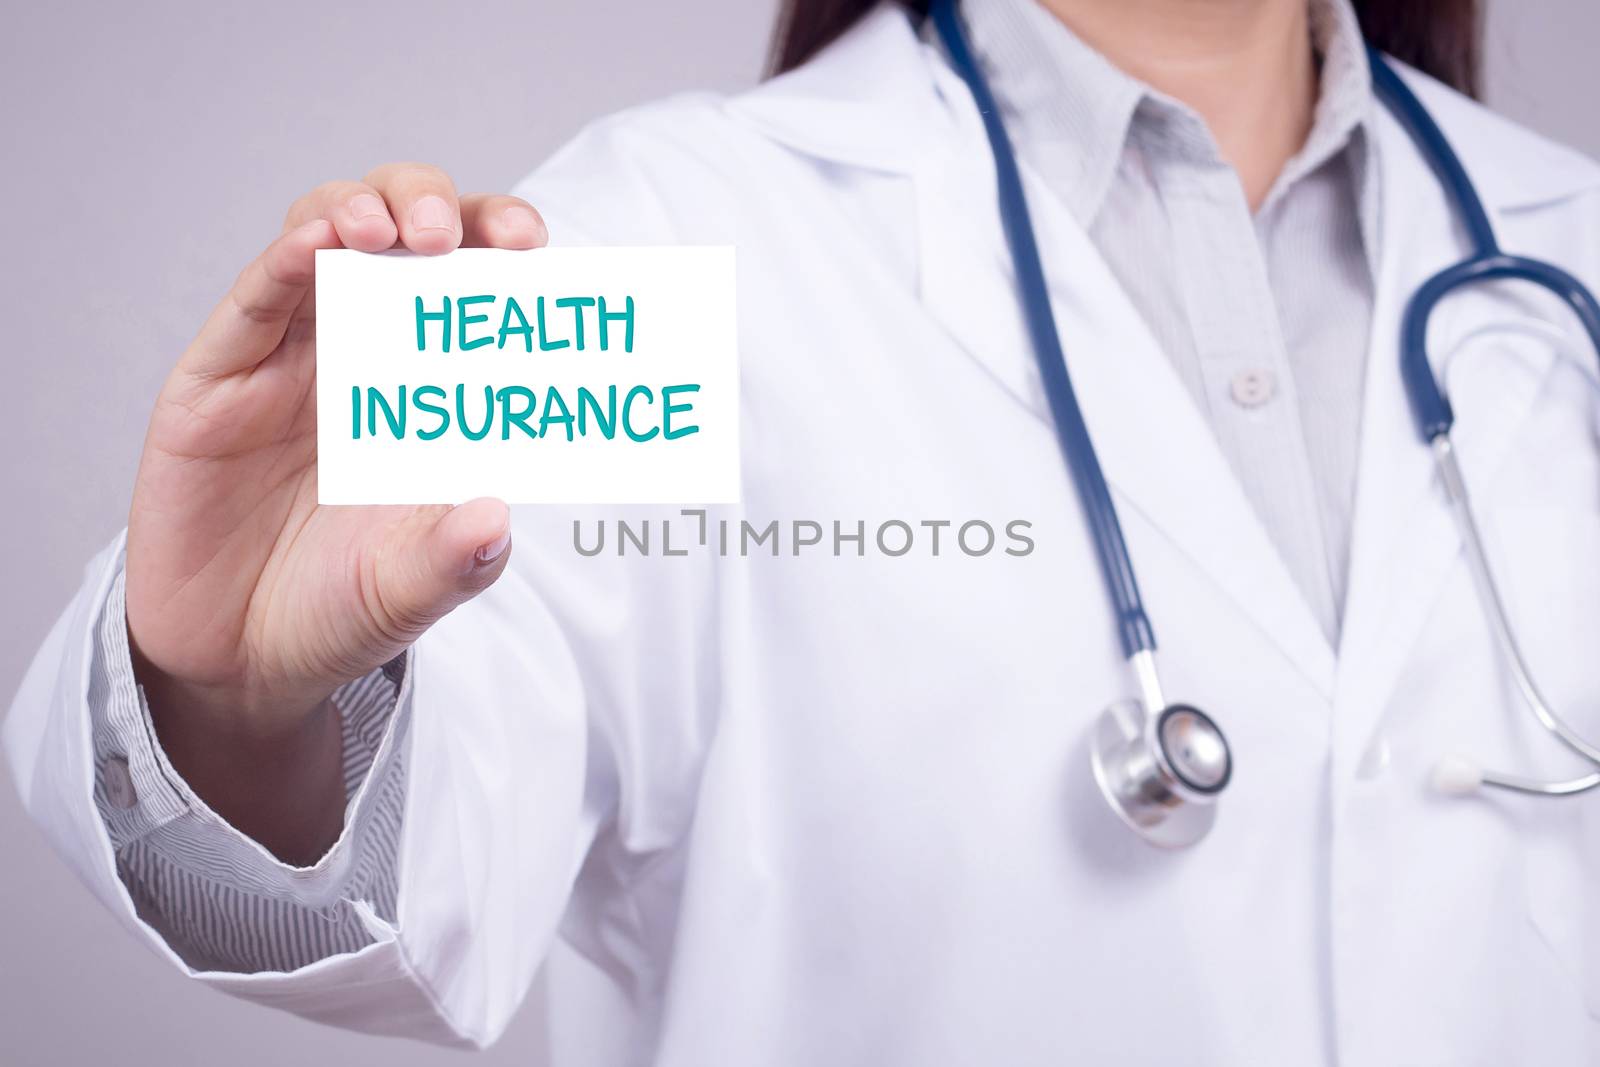 health insurance concept. doctor in medical clothing with stethoscope showing card for health insurance in hand, anonymous face